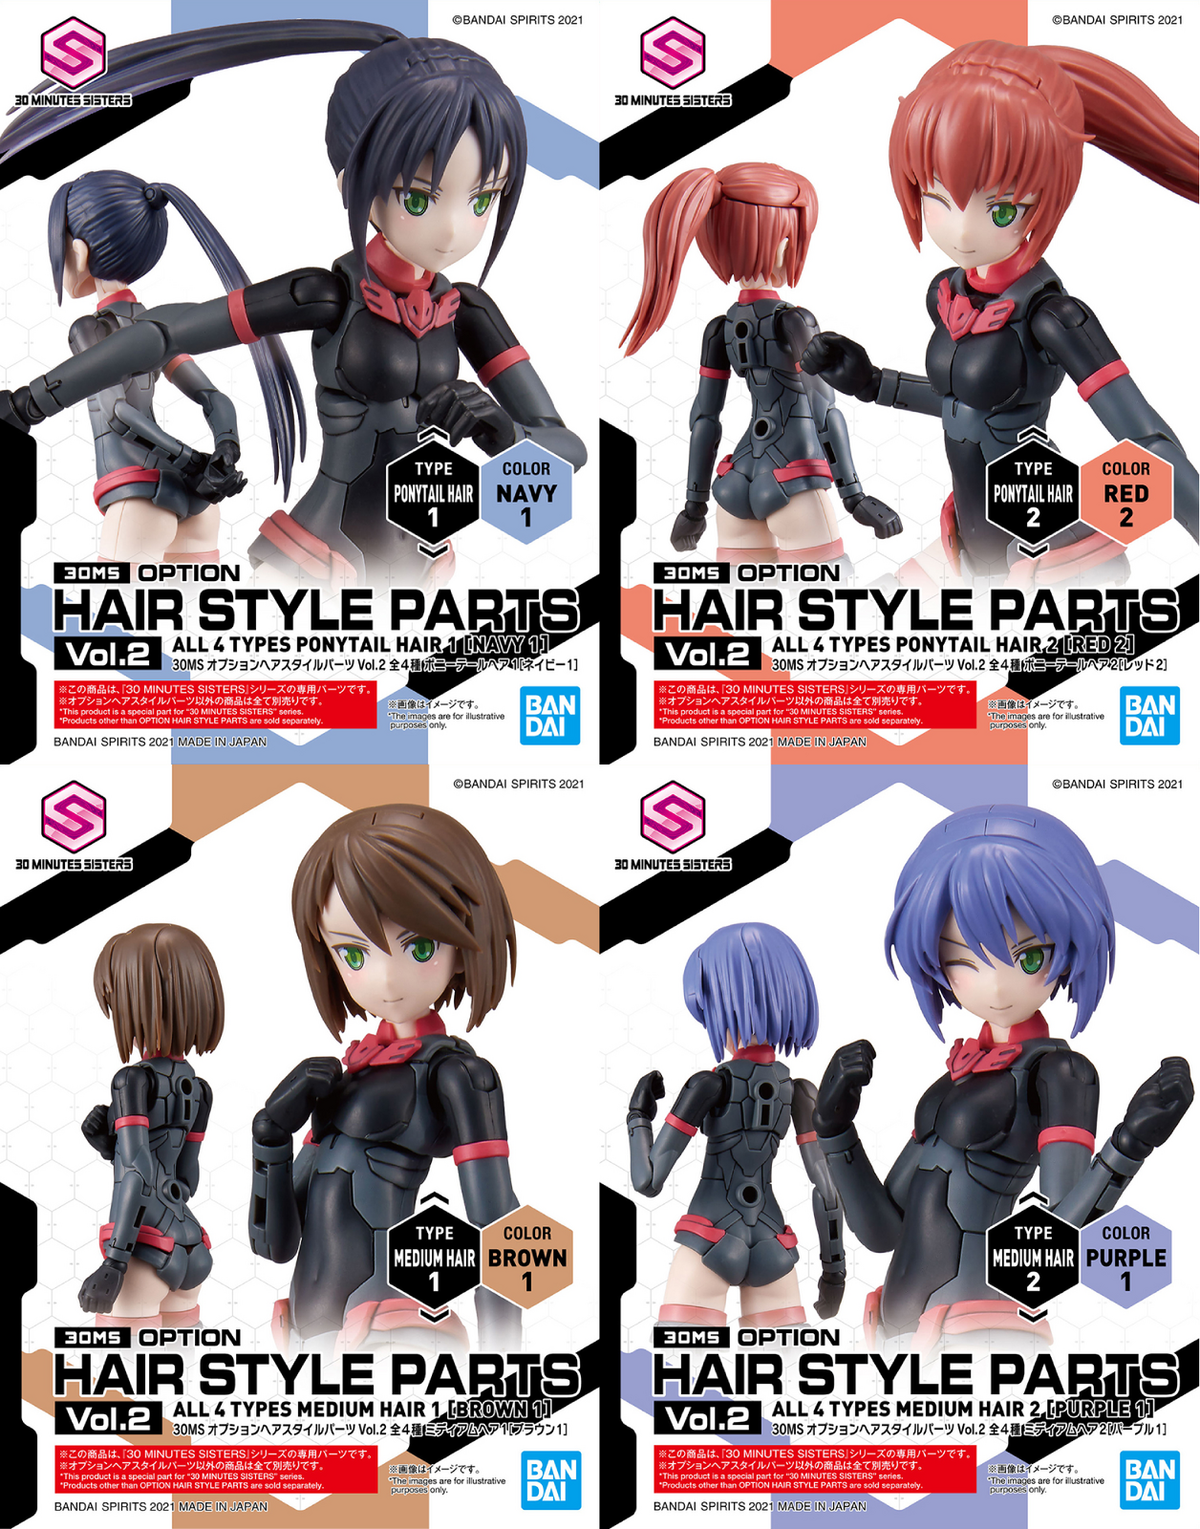 30MS : Option Hairstyle Parts Vol 2